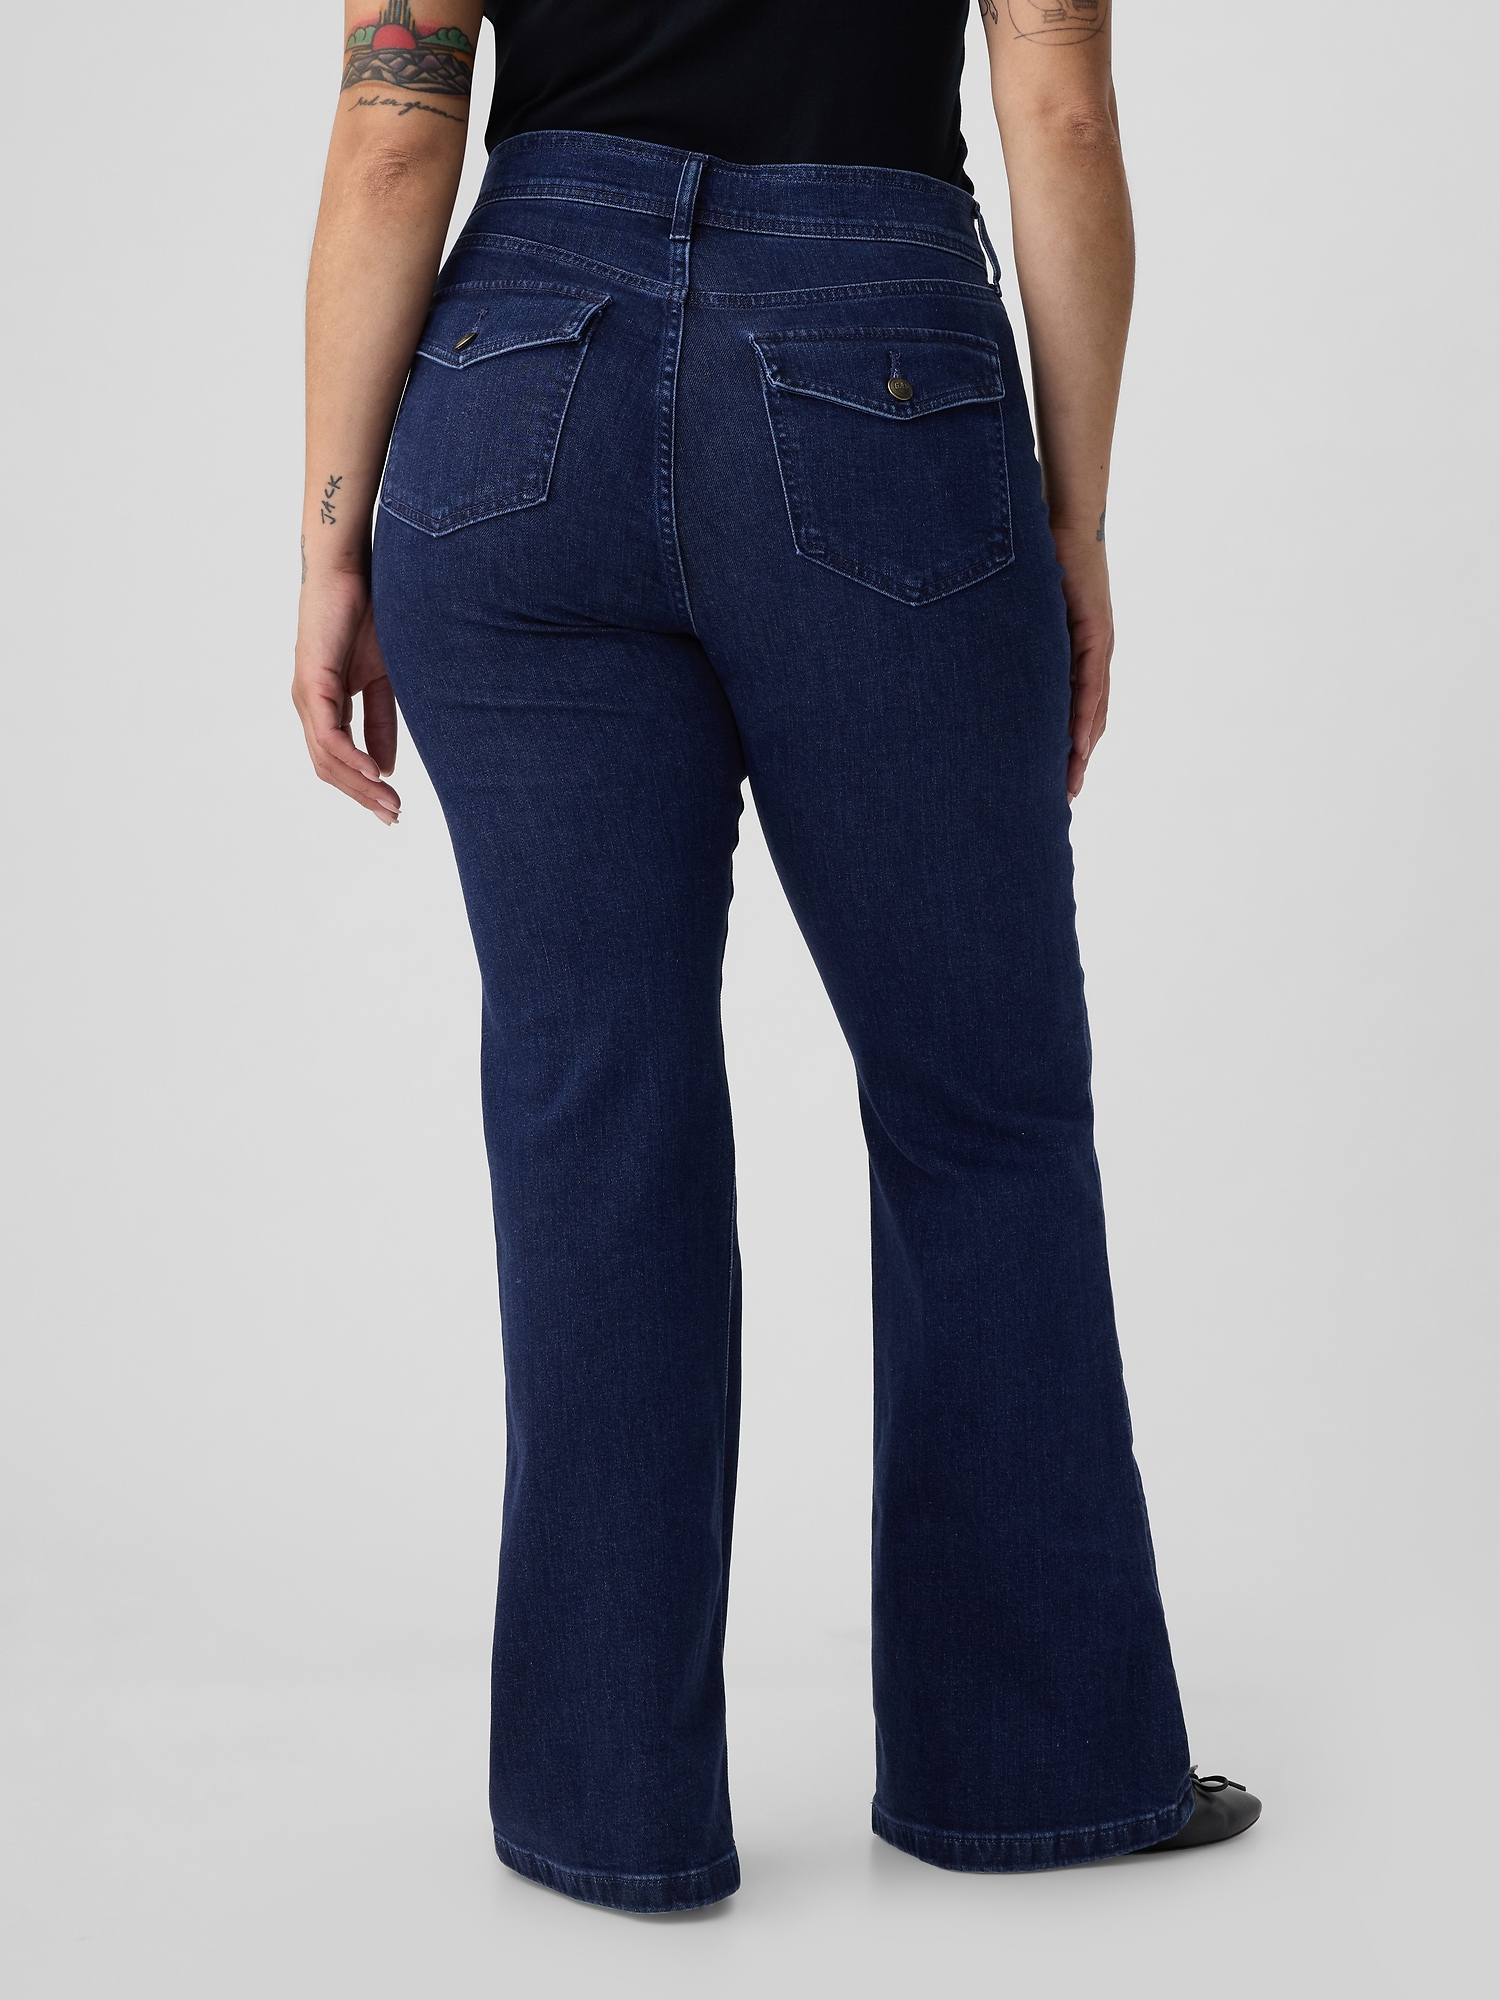 Perfection Extreme Flare Bell Bottoms 4 / Blue